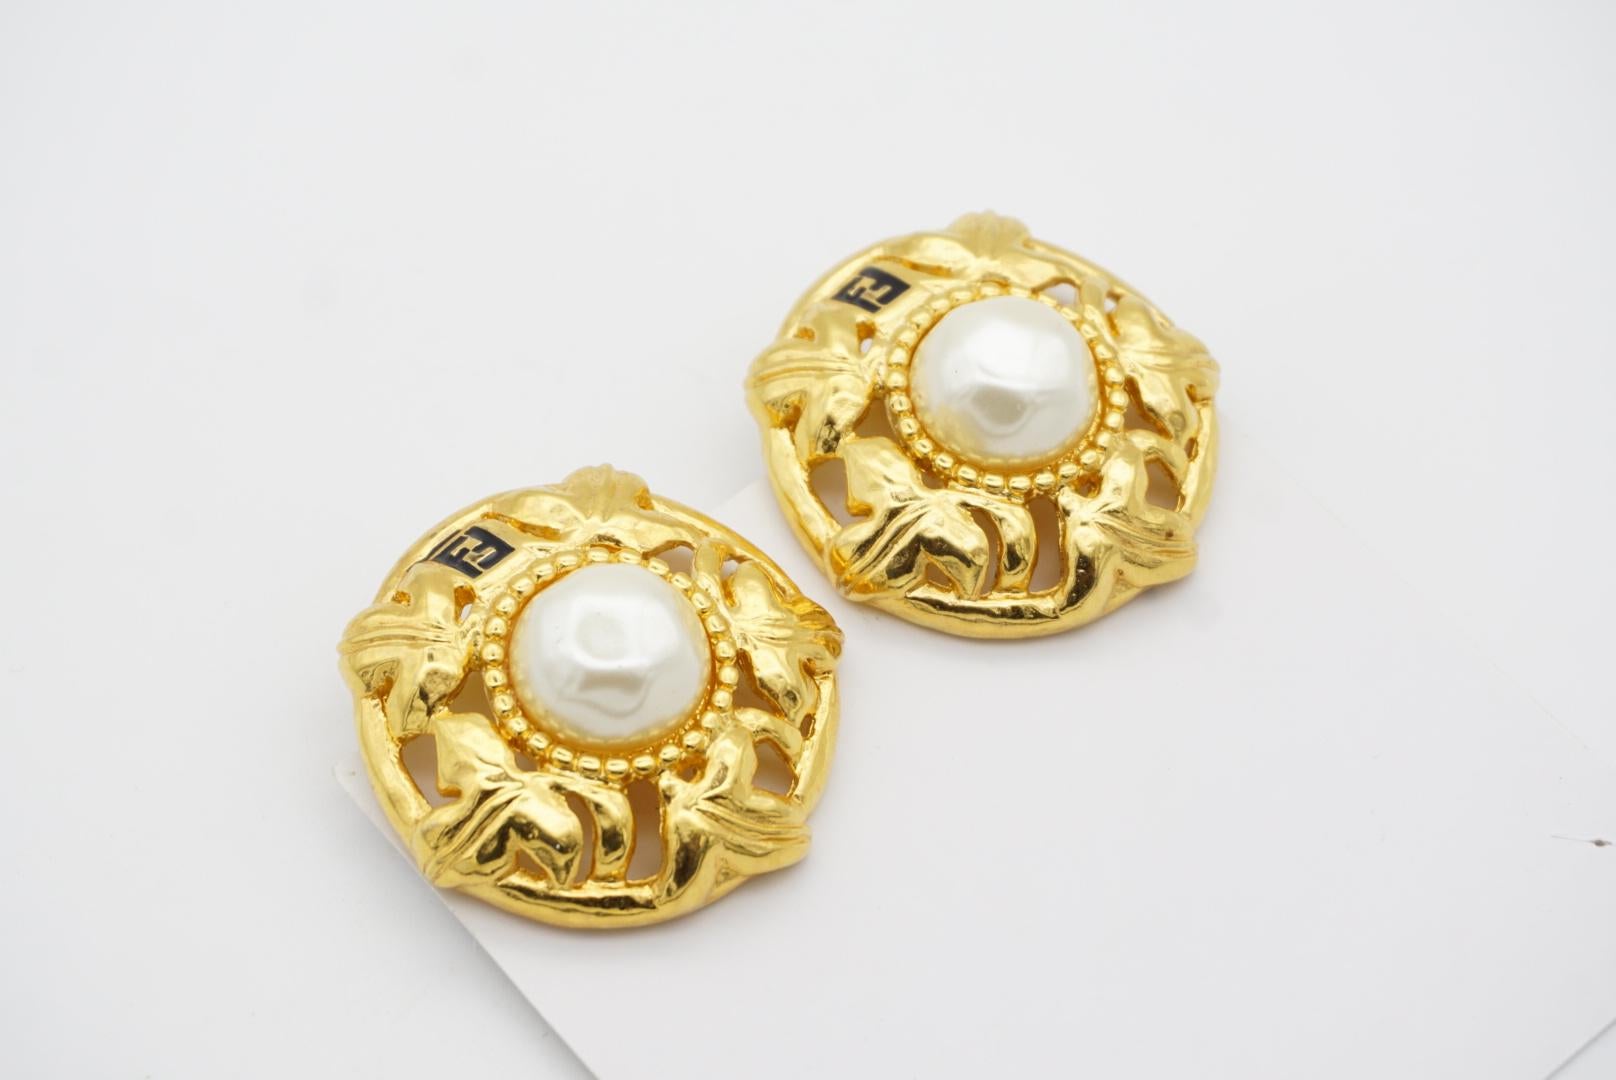 Fendi Vintage F Fendista Baroque Large Round Pearl Openwork Leaf Clip Earrings In Excellent Condition For Sale In Wokingham, England